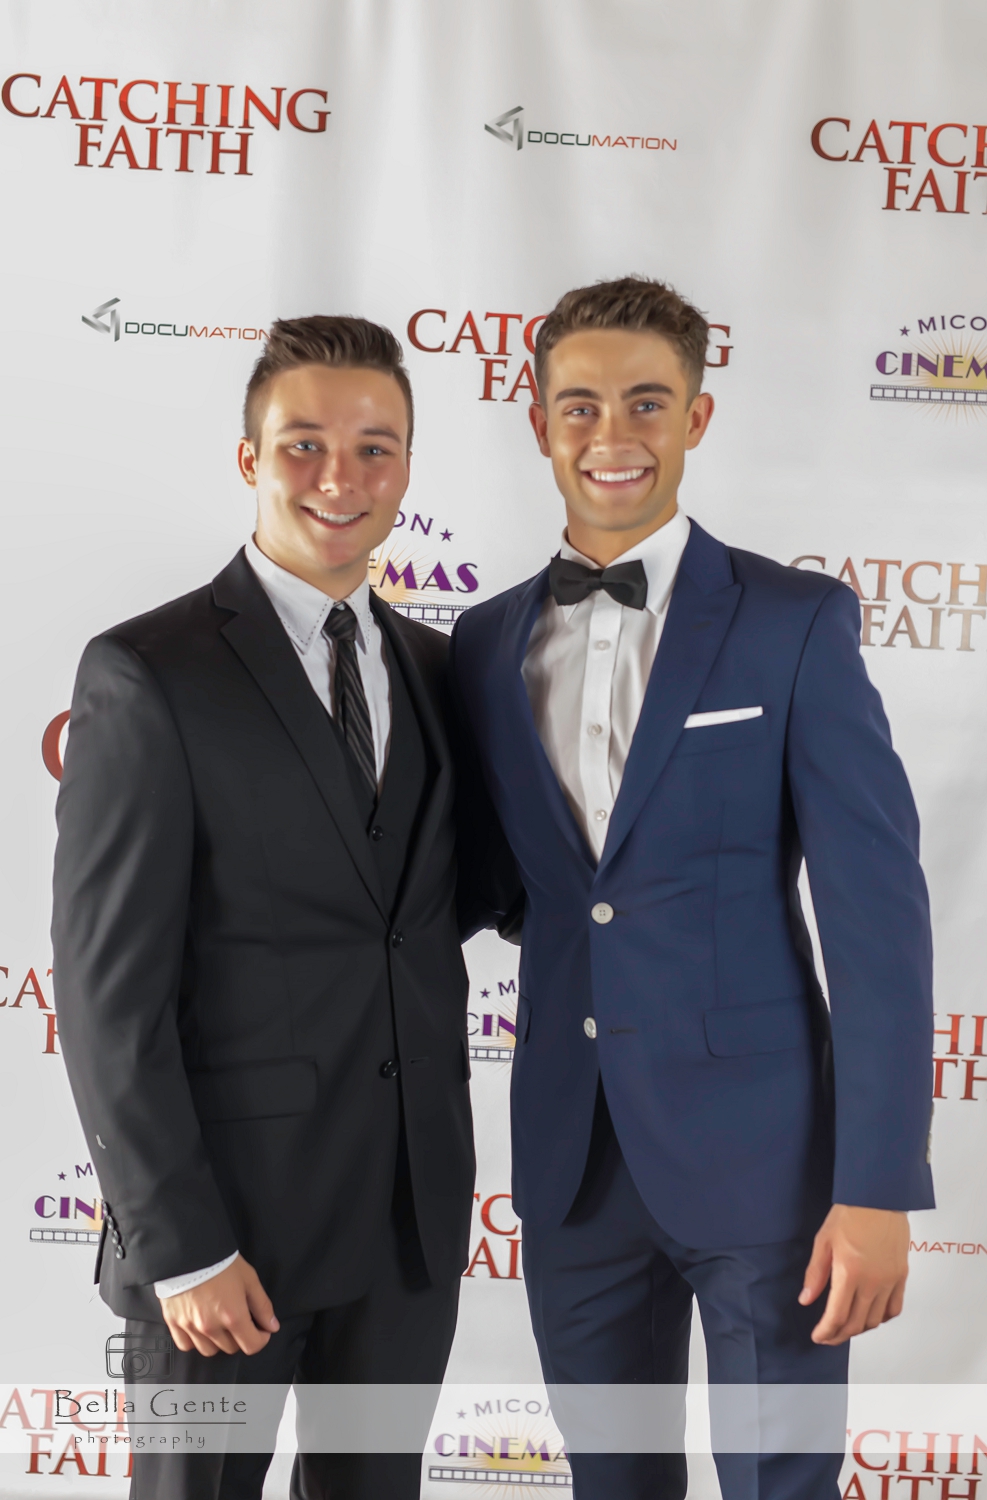 Red Carpet premiere with fellow actor, Garrett Westton, for 